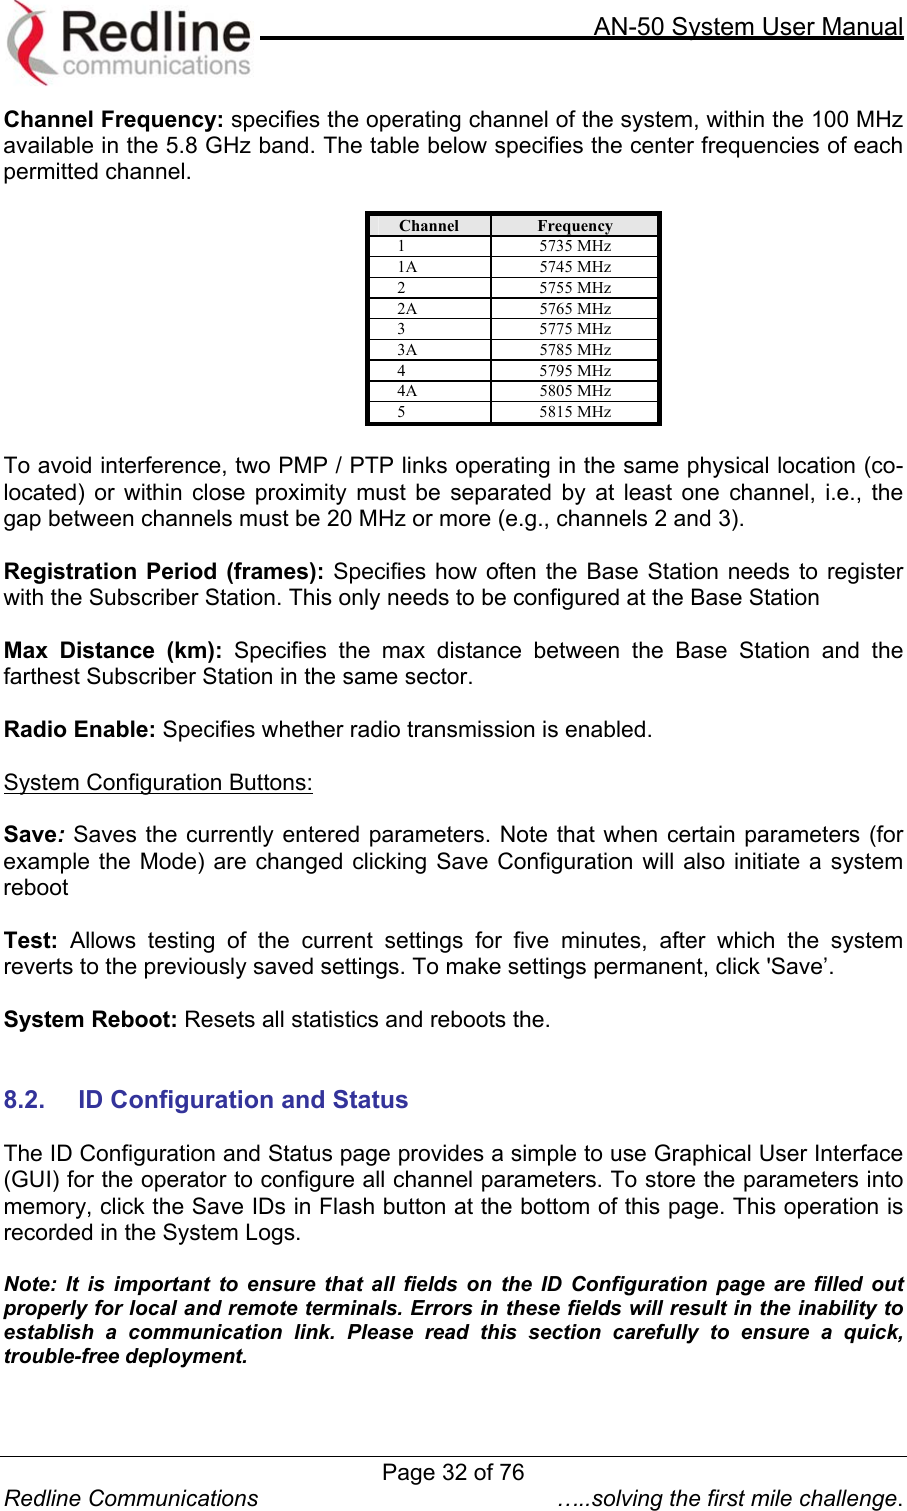     AN-50 System User Manual  Redline Communications  …..solving the first mile challenge. Channel Frequency: specifies the operating channel of the system, within the 100 MHz available in the 5.8 GHz band. The table below specifies the center frequencies of each permitted channel.   Channel  Frequency 1 5735 MHz 1A 5745 MHz 2 5755 MHz 2A 5765 MHz 3 5775 MHz 3A 5785 MHz 4 5795 MHz 4A 5805 MHz 5 5815 MHz  To avoid interference, two PMP / PTP links operating in the same physical location (co-located) or within close proximity must be separated by at least one channel, i.e., the gap between channels must be 20 MHz or more (e.g., channels 2 and 3).   Registration Period (frames): Specifies how often the Base Station needs to register with the Subscriber Station. This only needs to be configured at the Base Station  Max Distance (km): Specifies the max distance between the Base Station and the farthest Subscriber Station in the same sector.  Radio Enable: Specifies whether radio transmission is enabled.  System Configuration Buttons:  Save: Saves the currently entered parameters. Note that when certain parameters (for example the Mode) are changed clicking Save Configuration will also initiate a system reboot  Test: Allows testing of the current settings for five minutes, after which the system reverts to the previously saved settings. To make settings permanent, click &apos;Save’.  System Reboot: Resets all statistics and reboots the.   8.2. ID Configuration and Status  The ID Configuration and Status page provides a simple to use Graphical User Interface (GUI) for the operator to configure all channel parameters. To store the parameters into memory, click the Save IDs in Flash button at the bottom of this page. This operation is recorded in the System Logs.  Note: It is important to ensure that all fields on the ID Configuration page are filled out properly for local and remote terminals. Errors in these fields will result in the inability to establish a communication link. Please read this section carefully to ensure a quick, trouble-free deployment.   Page 32 of 76